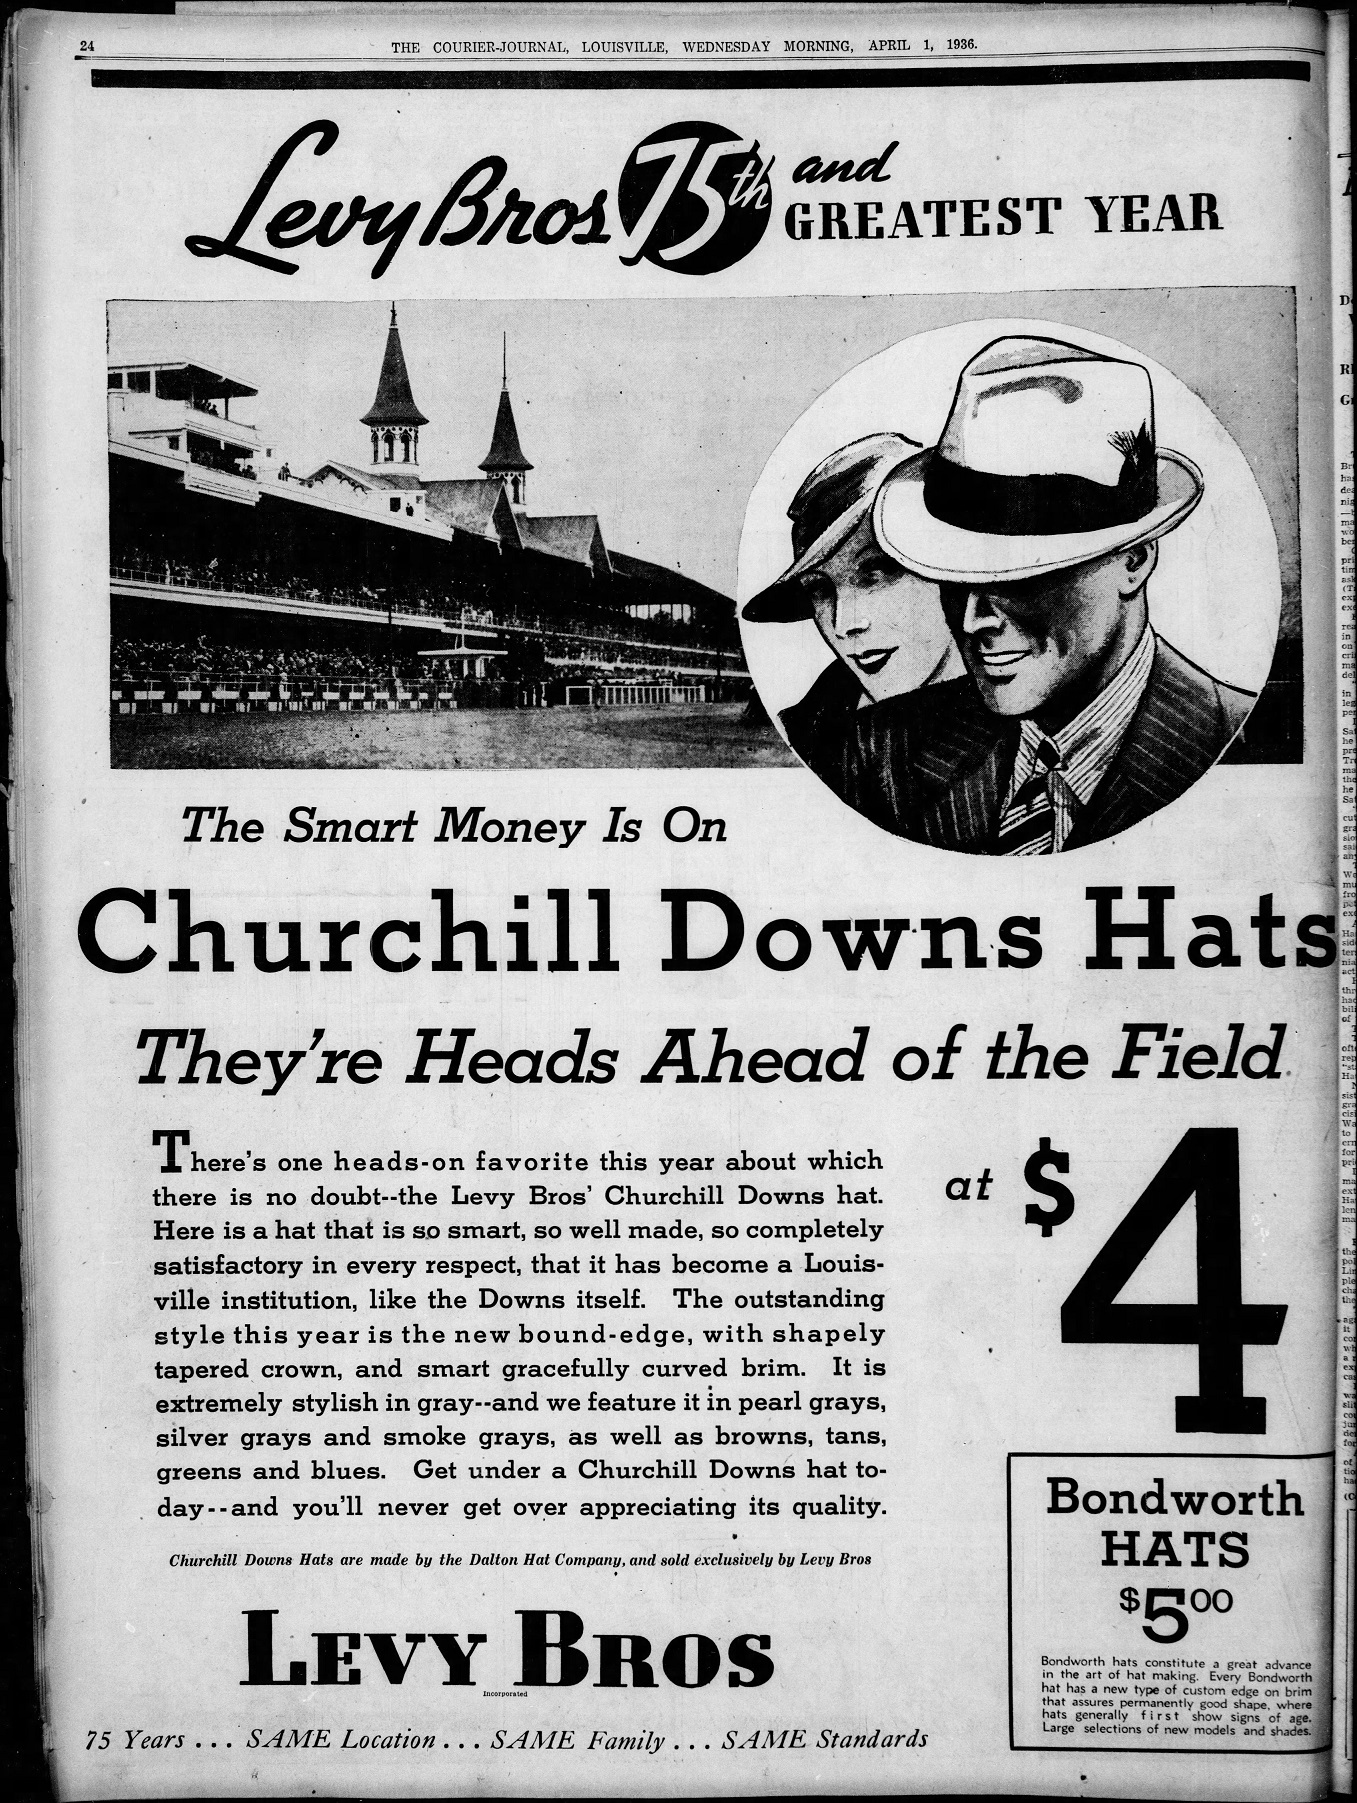 The_Courier_Journal_Wed__Apr_1__1936_.jpg